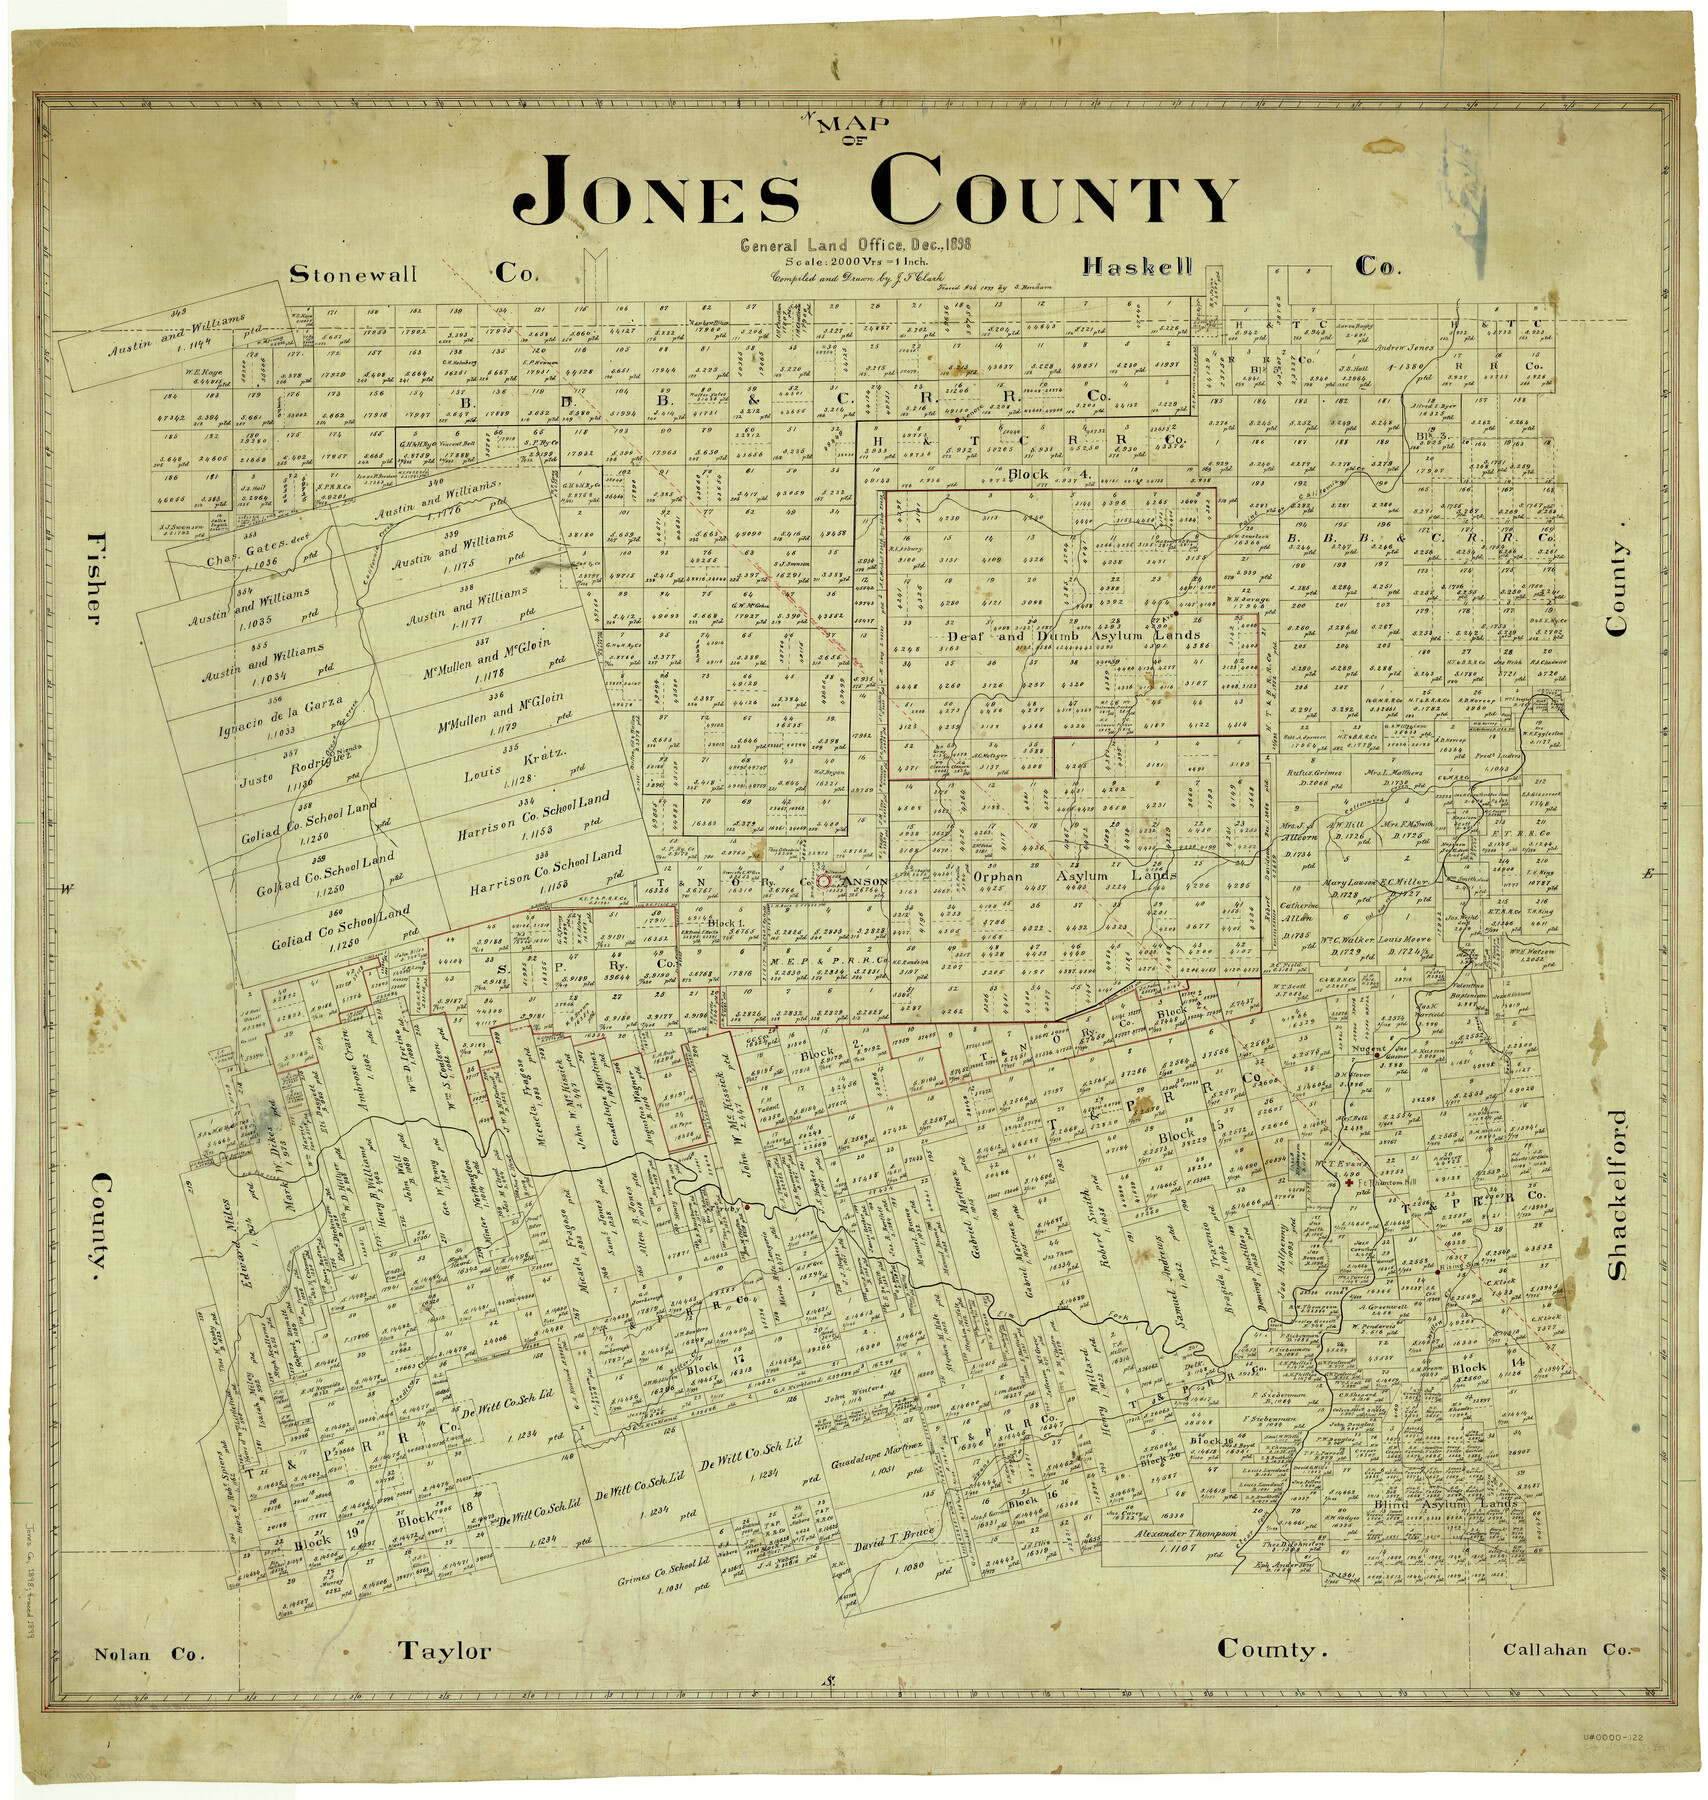 4996, Map of Jones County, General Map Collection